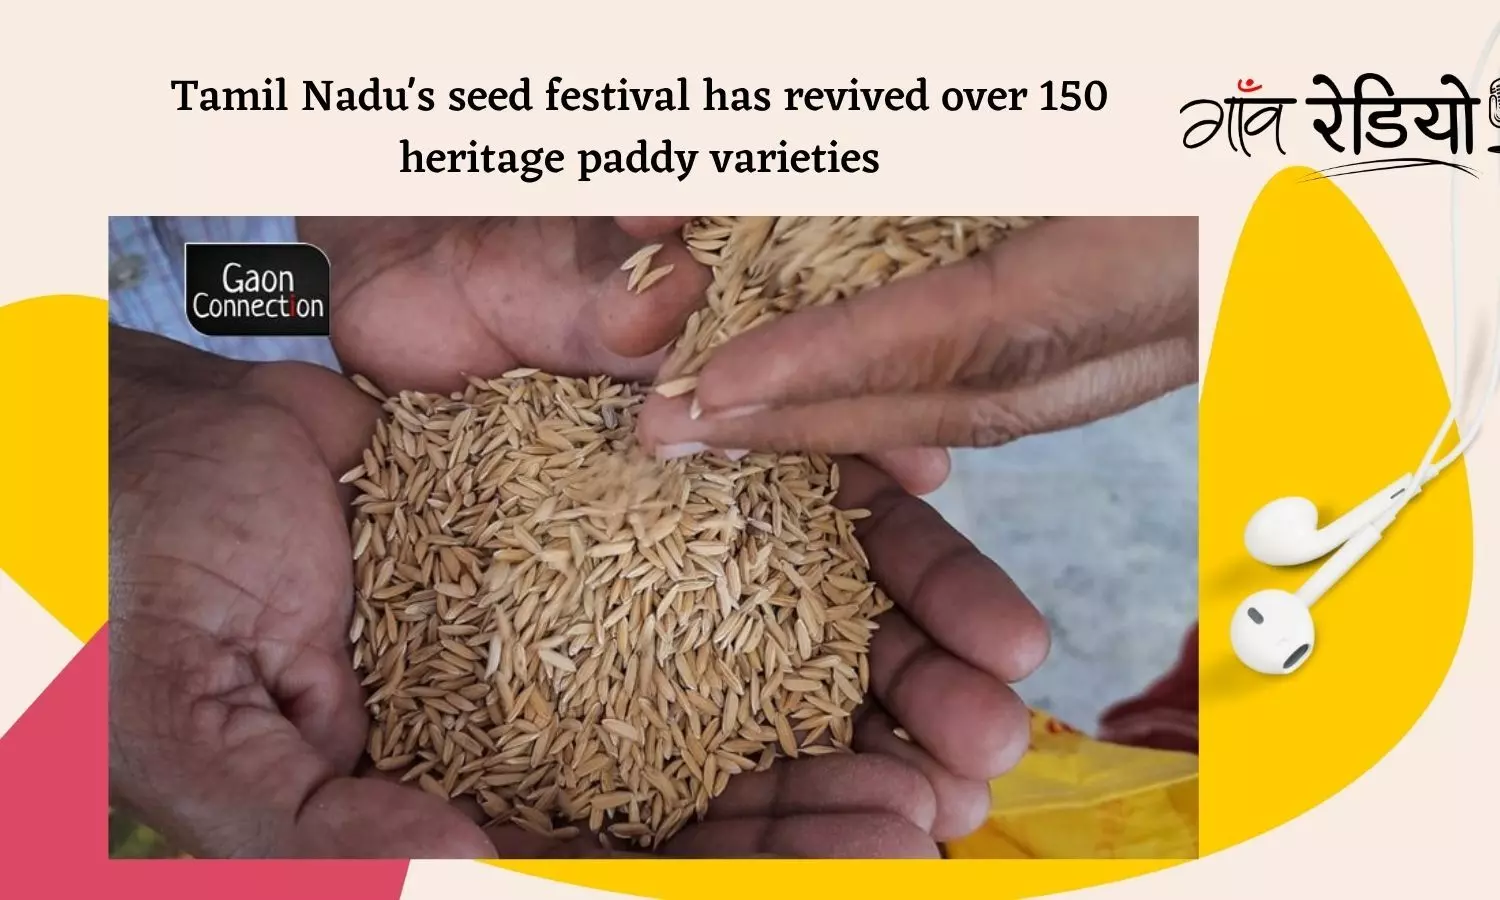 Gaon Radio: Listen about Tamil Nadus seed festival that has revived over 150 heritage paddy varieties